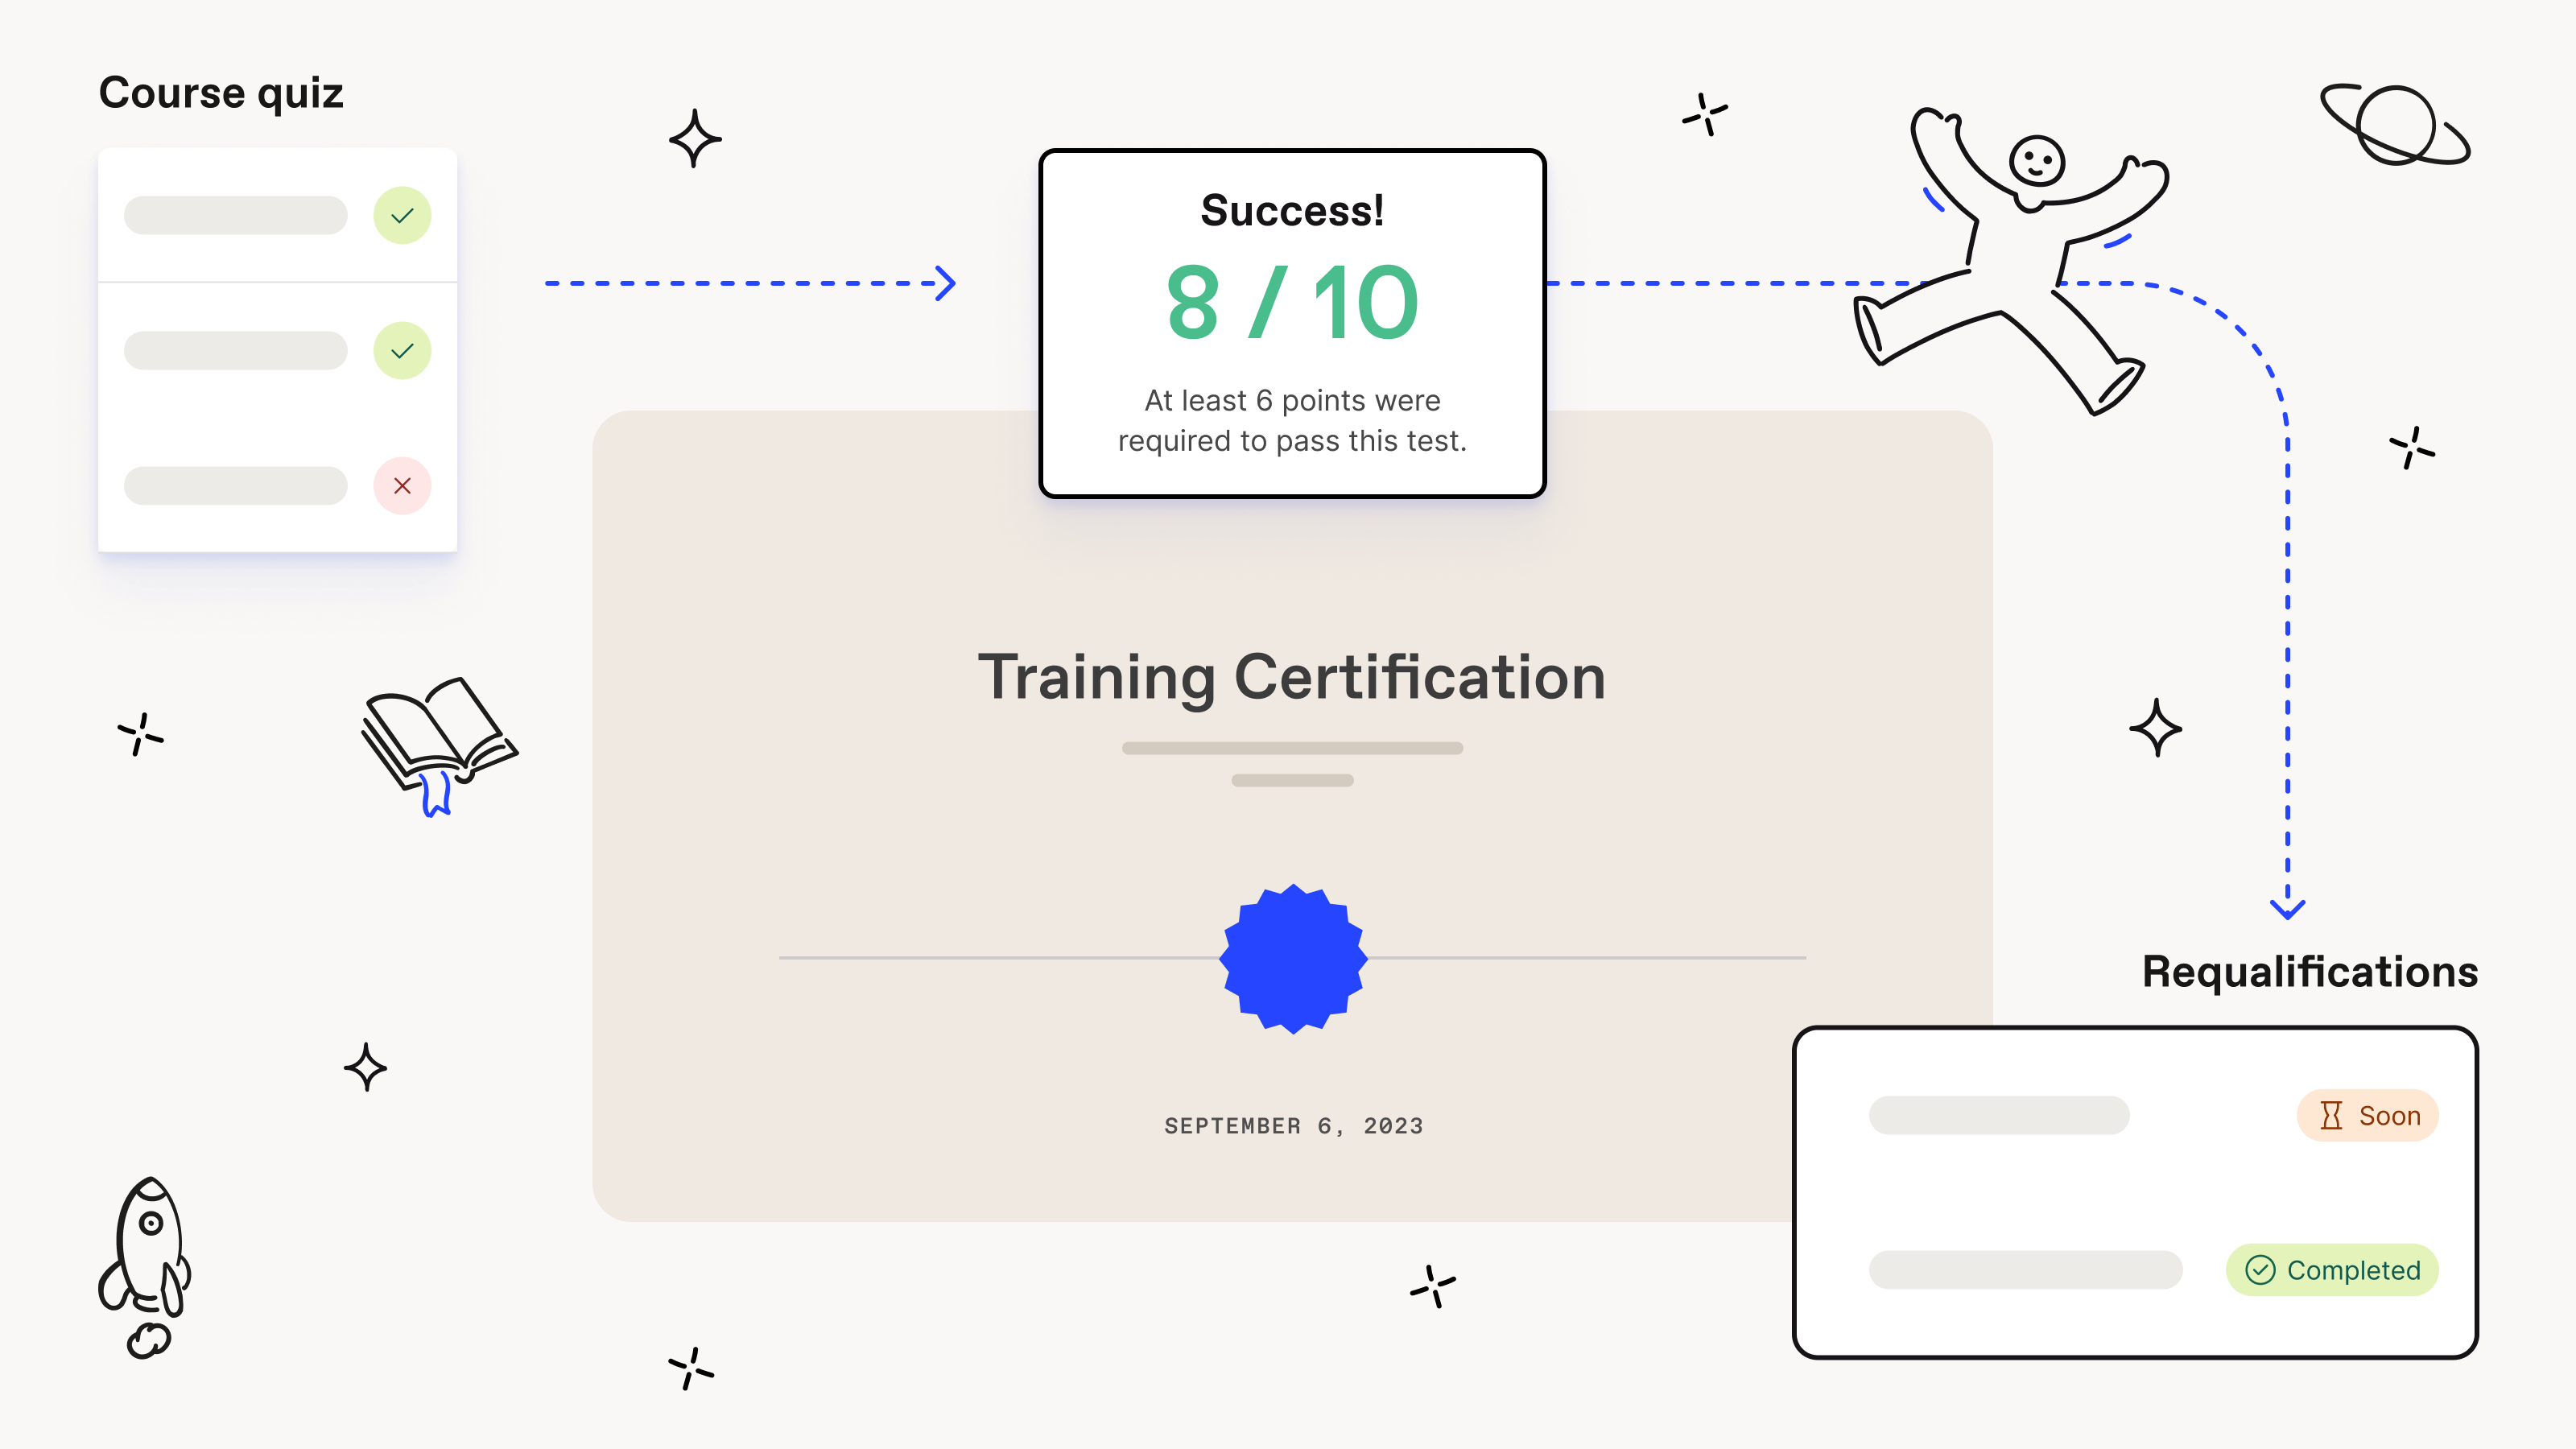 A user successfully completing their qualification quiz, earning a training certificate, and being automatically scheduled for their next requalification.